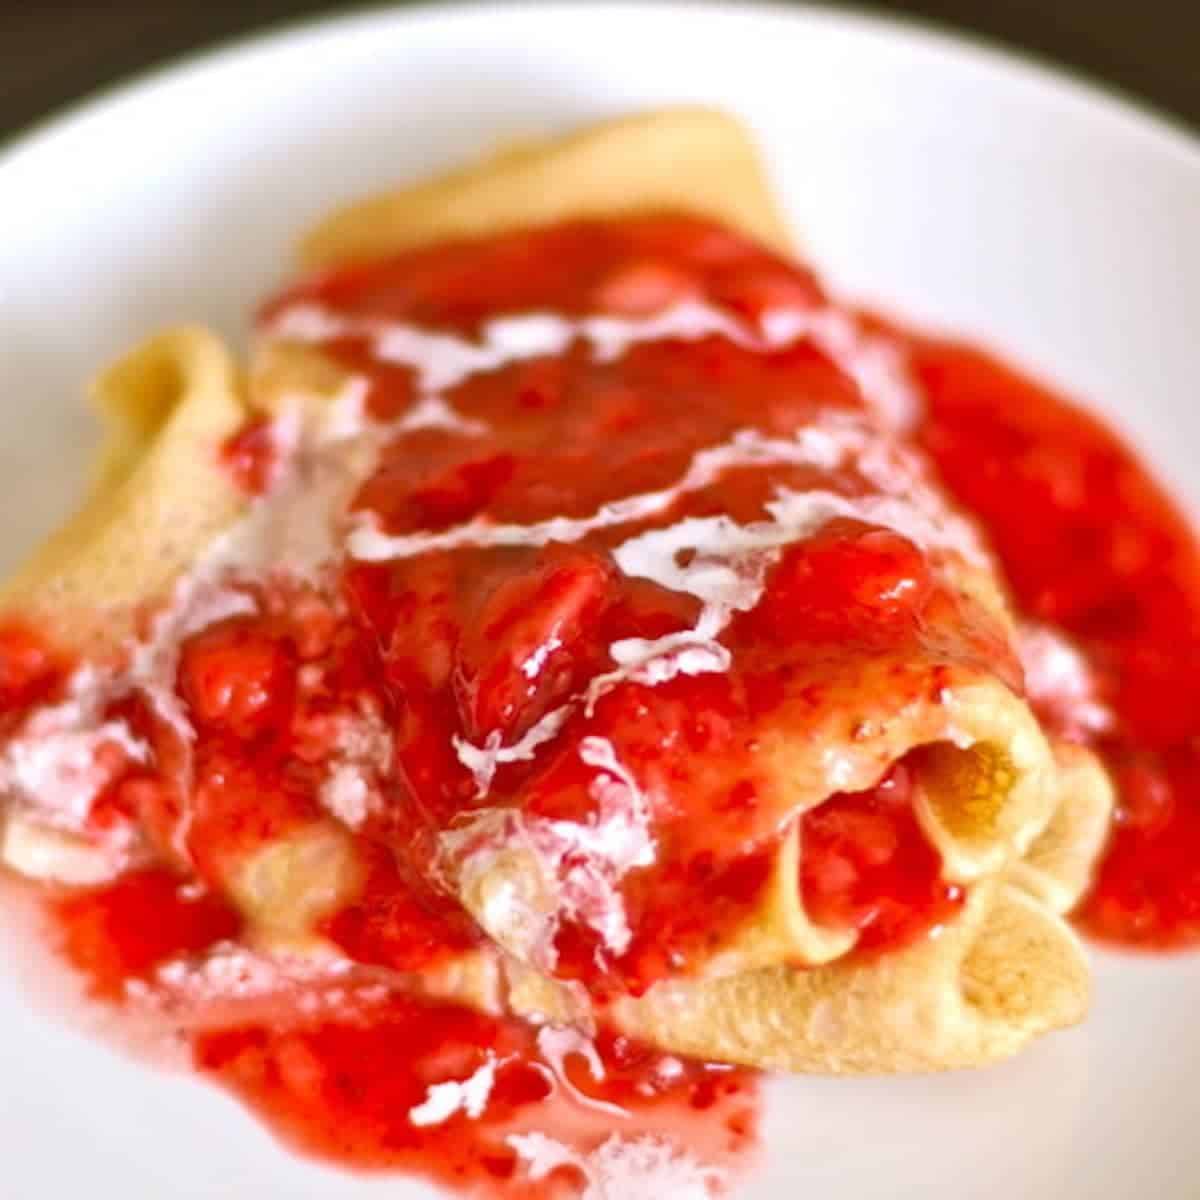 Strawberry blintzes stuffed with creamy ricotta cheese and topped with fresh sweet strawberries.